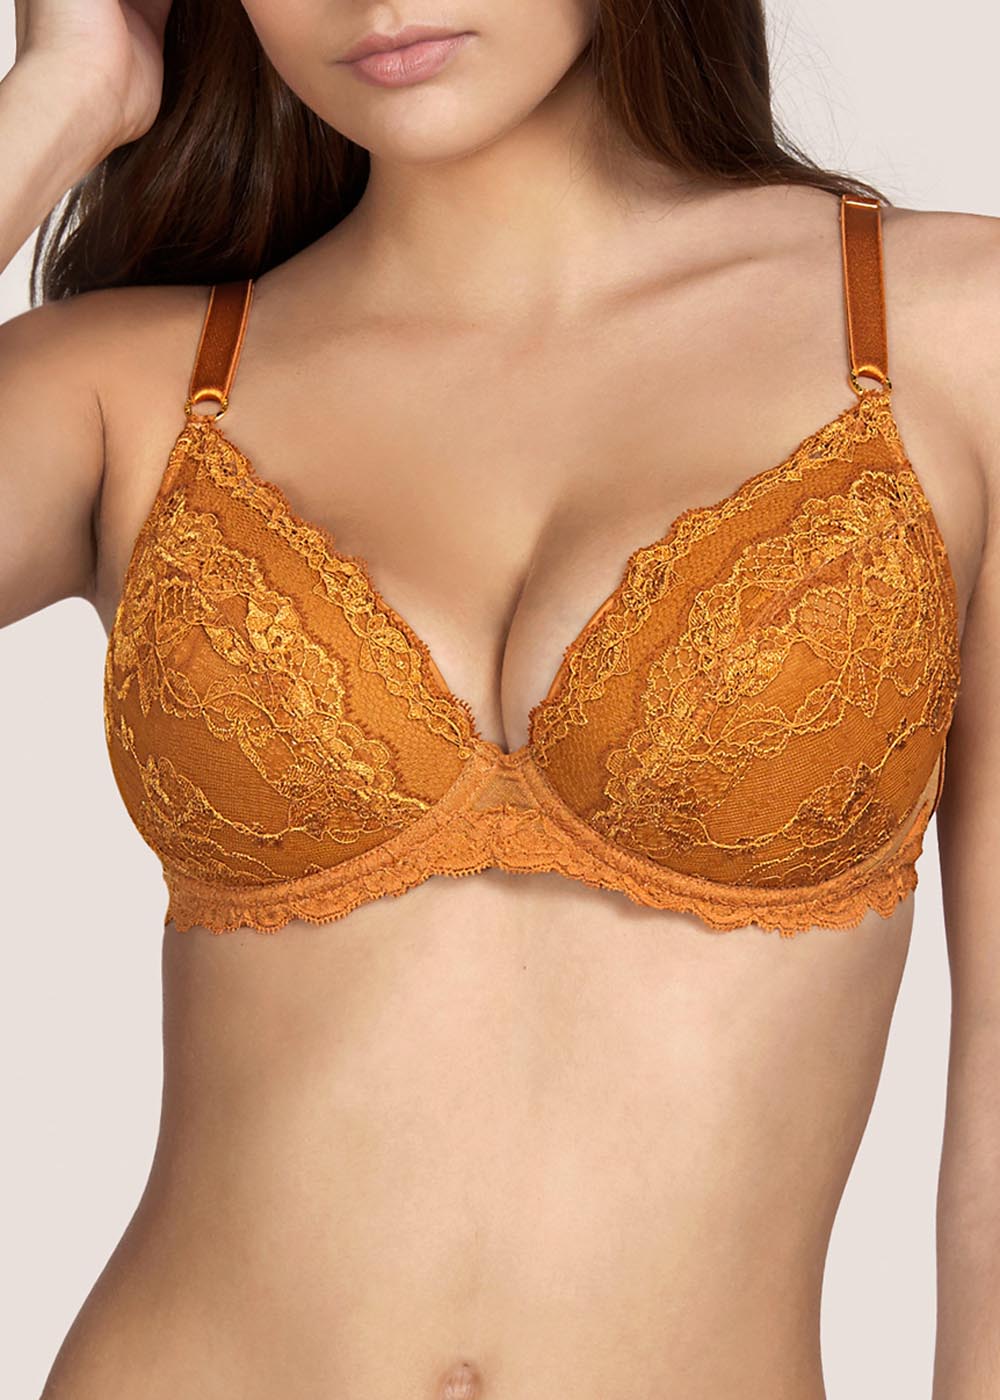 Soutien-gorge Push Up  Coussinets Amovibles Andres Sarda Copper Variant